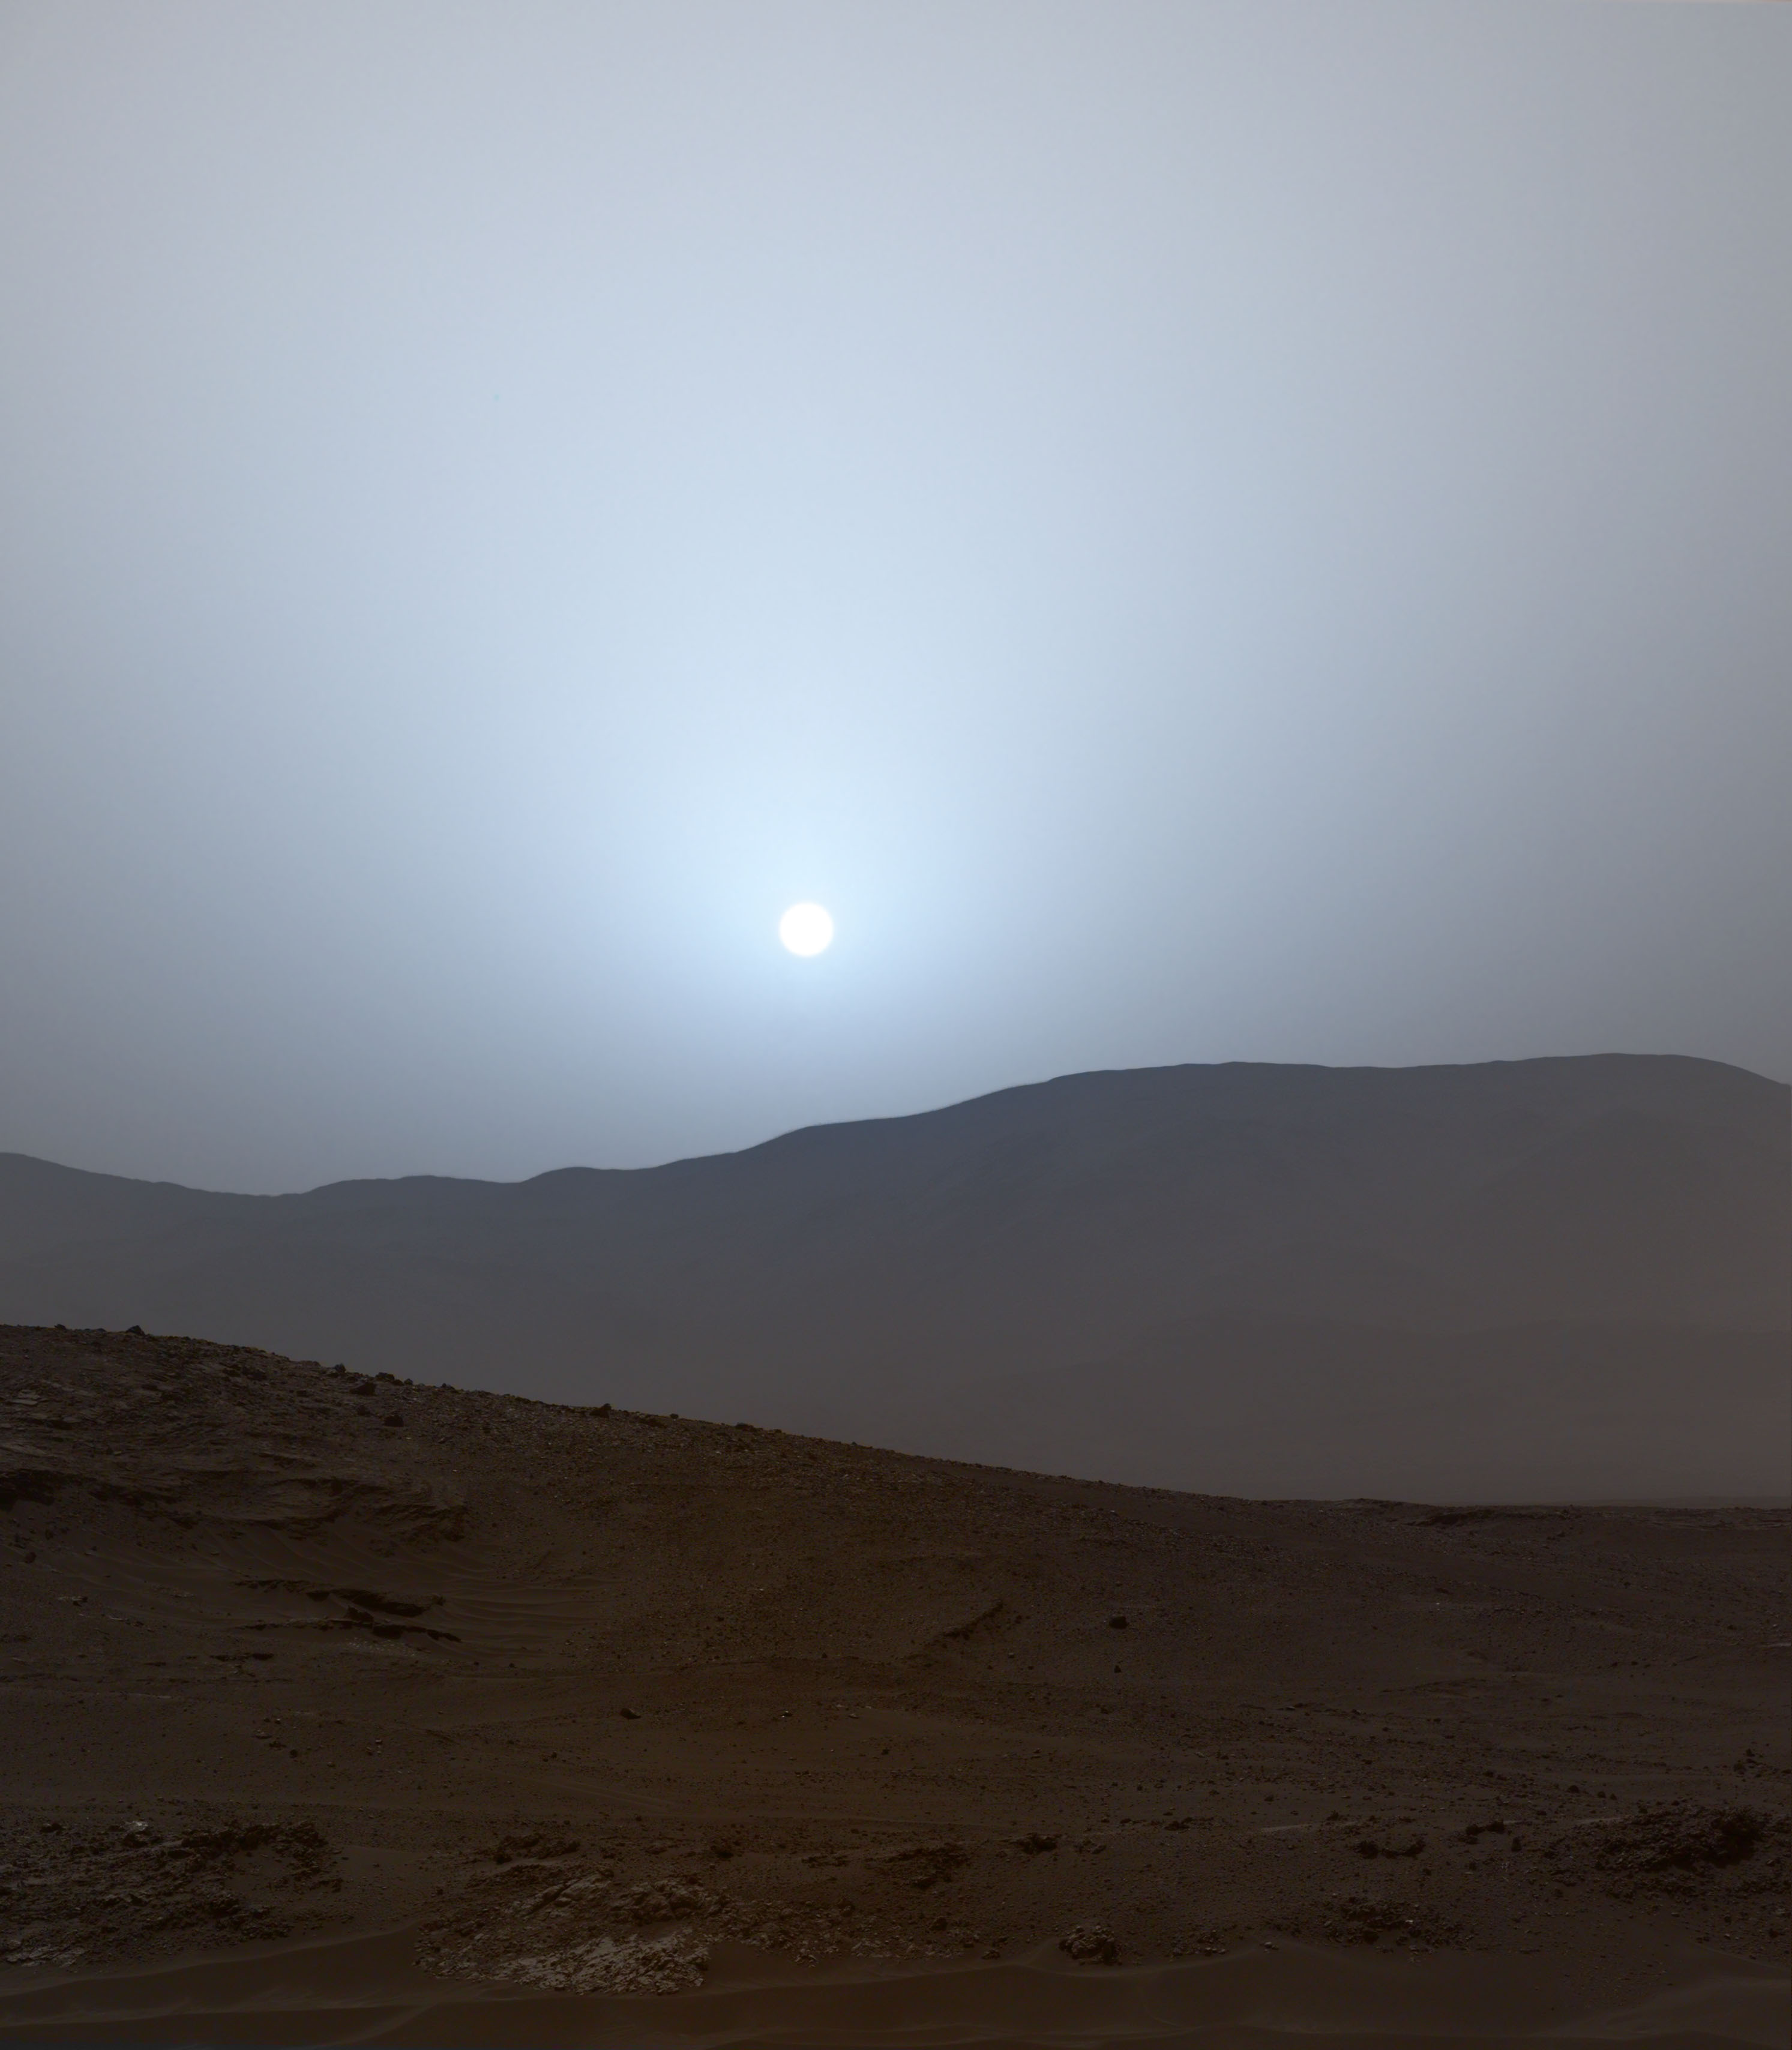 A Sunset on Mars: Crafting a scene from archival data | The Planetary Society2986 x 3416